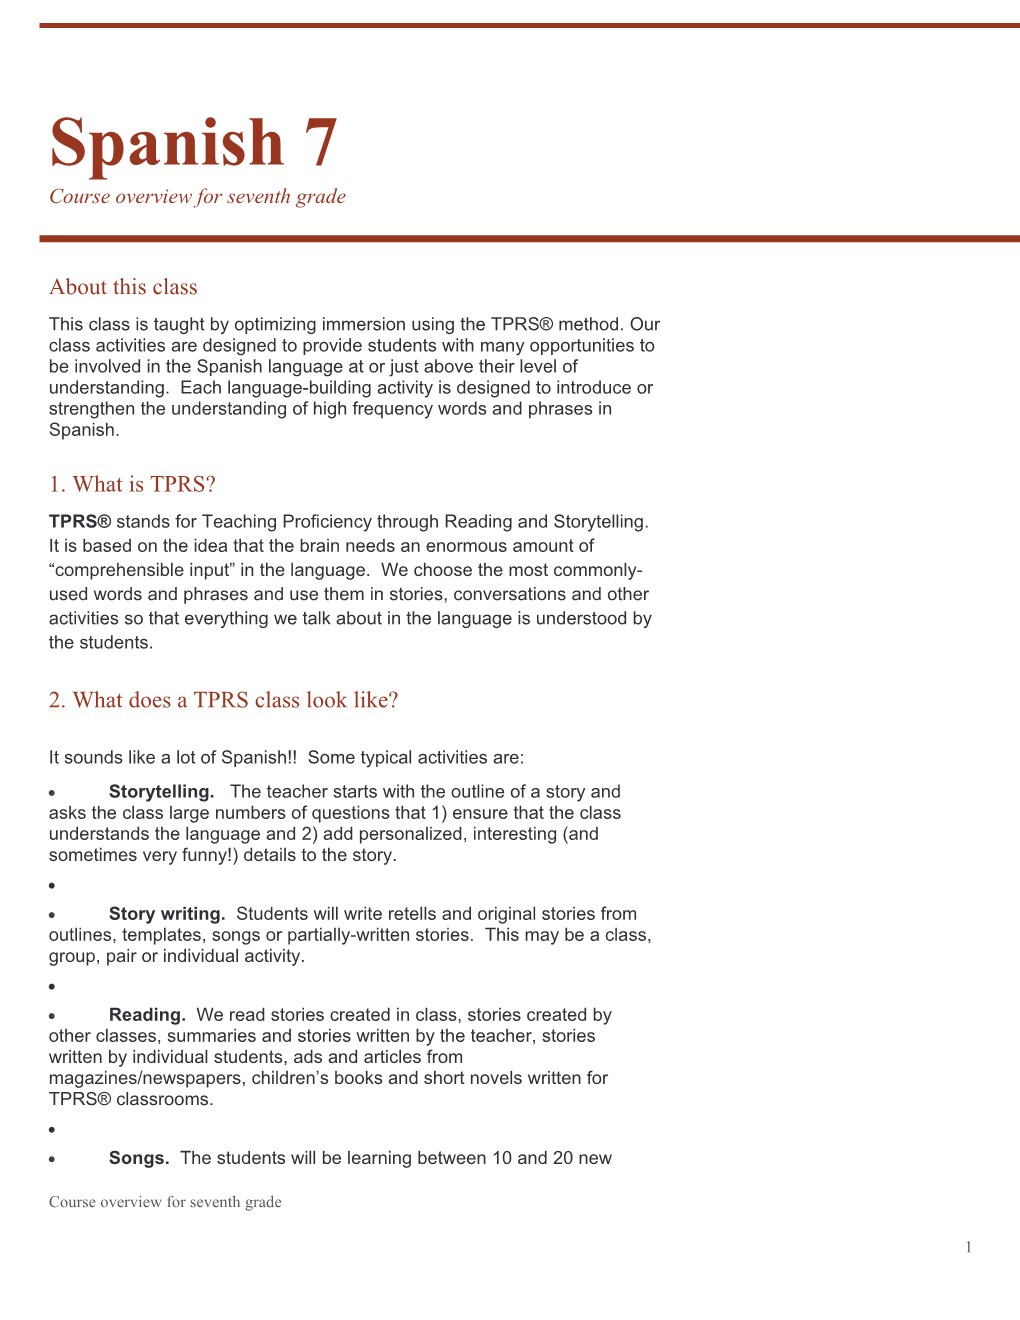 It Sounds Like a Lot of Spanish Some Typical Activities Are